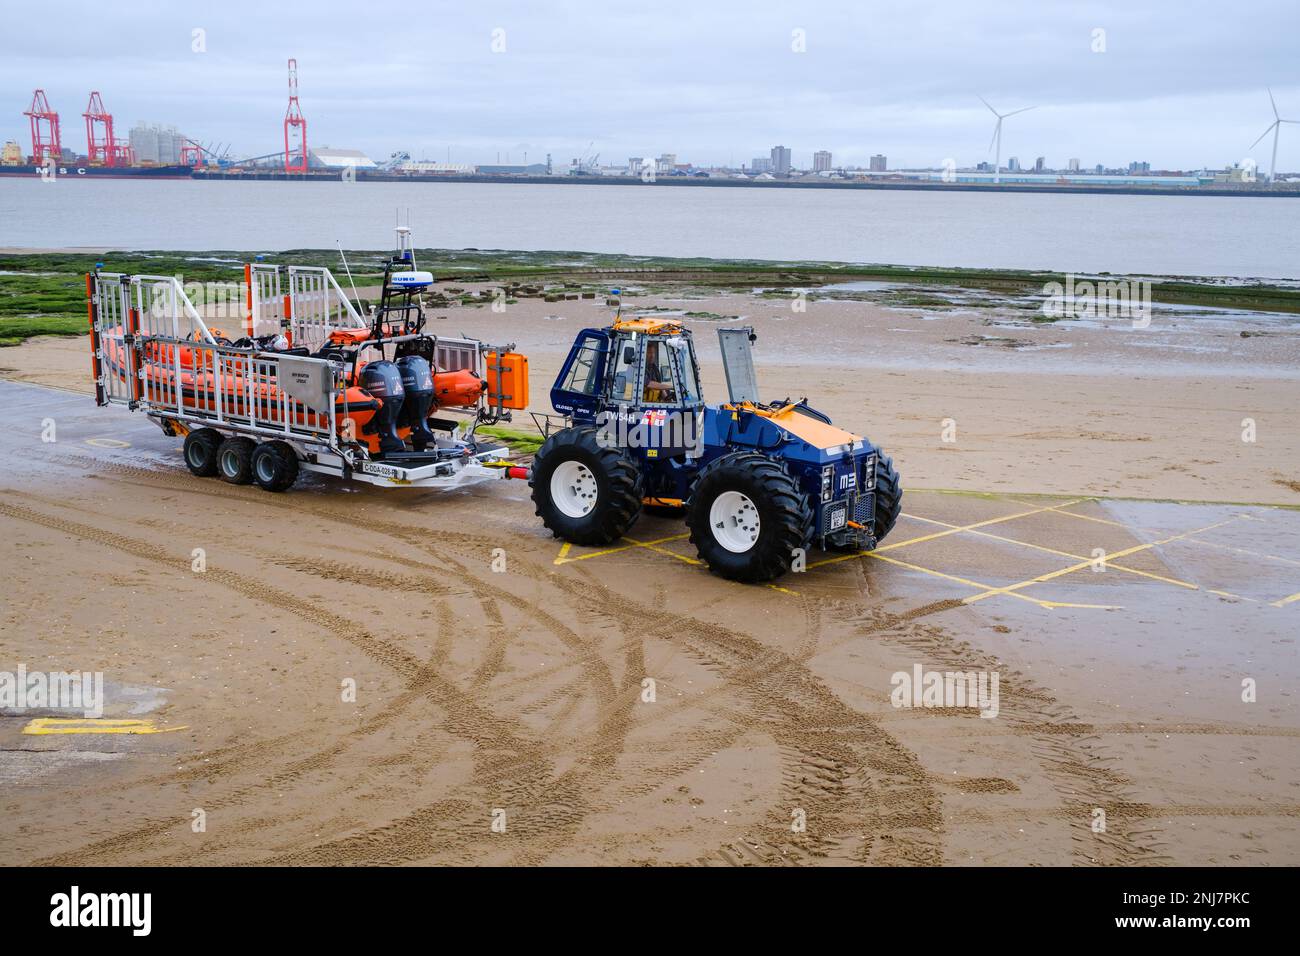 New Brighton life boat crew recovering the boat back up the beach with tractor towing the rib on a trailer after completing a rescue out to sea Stock Photo